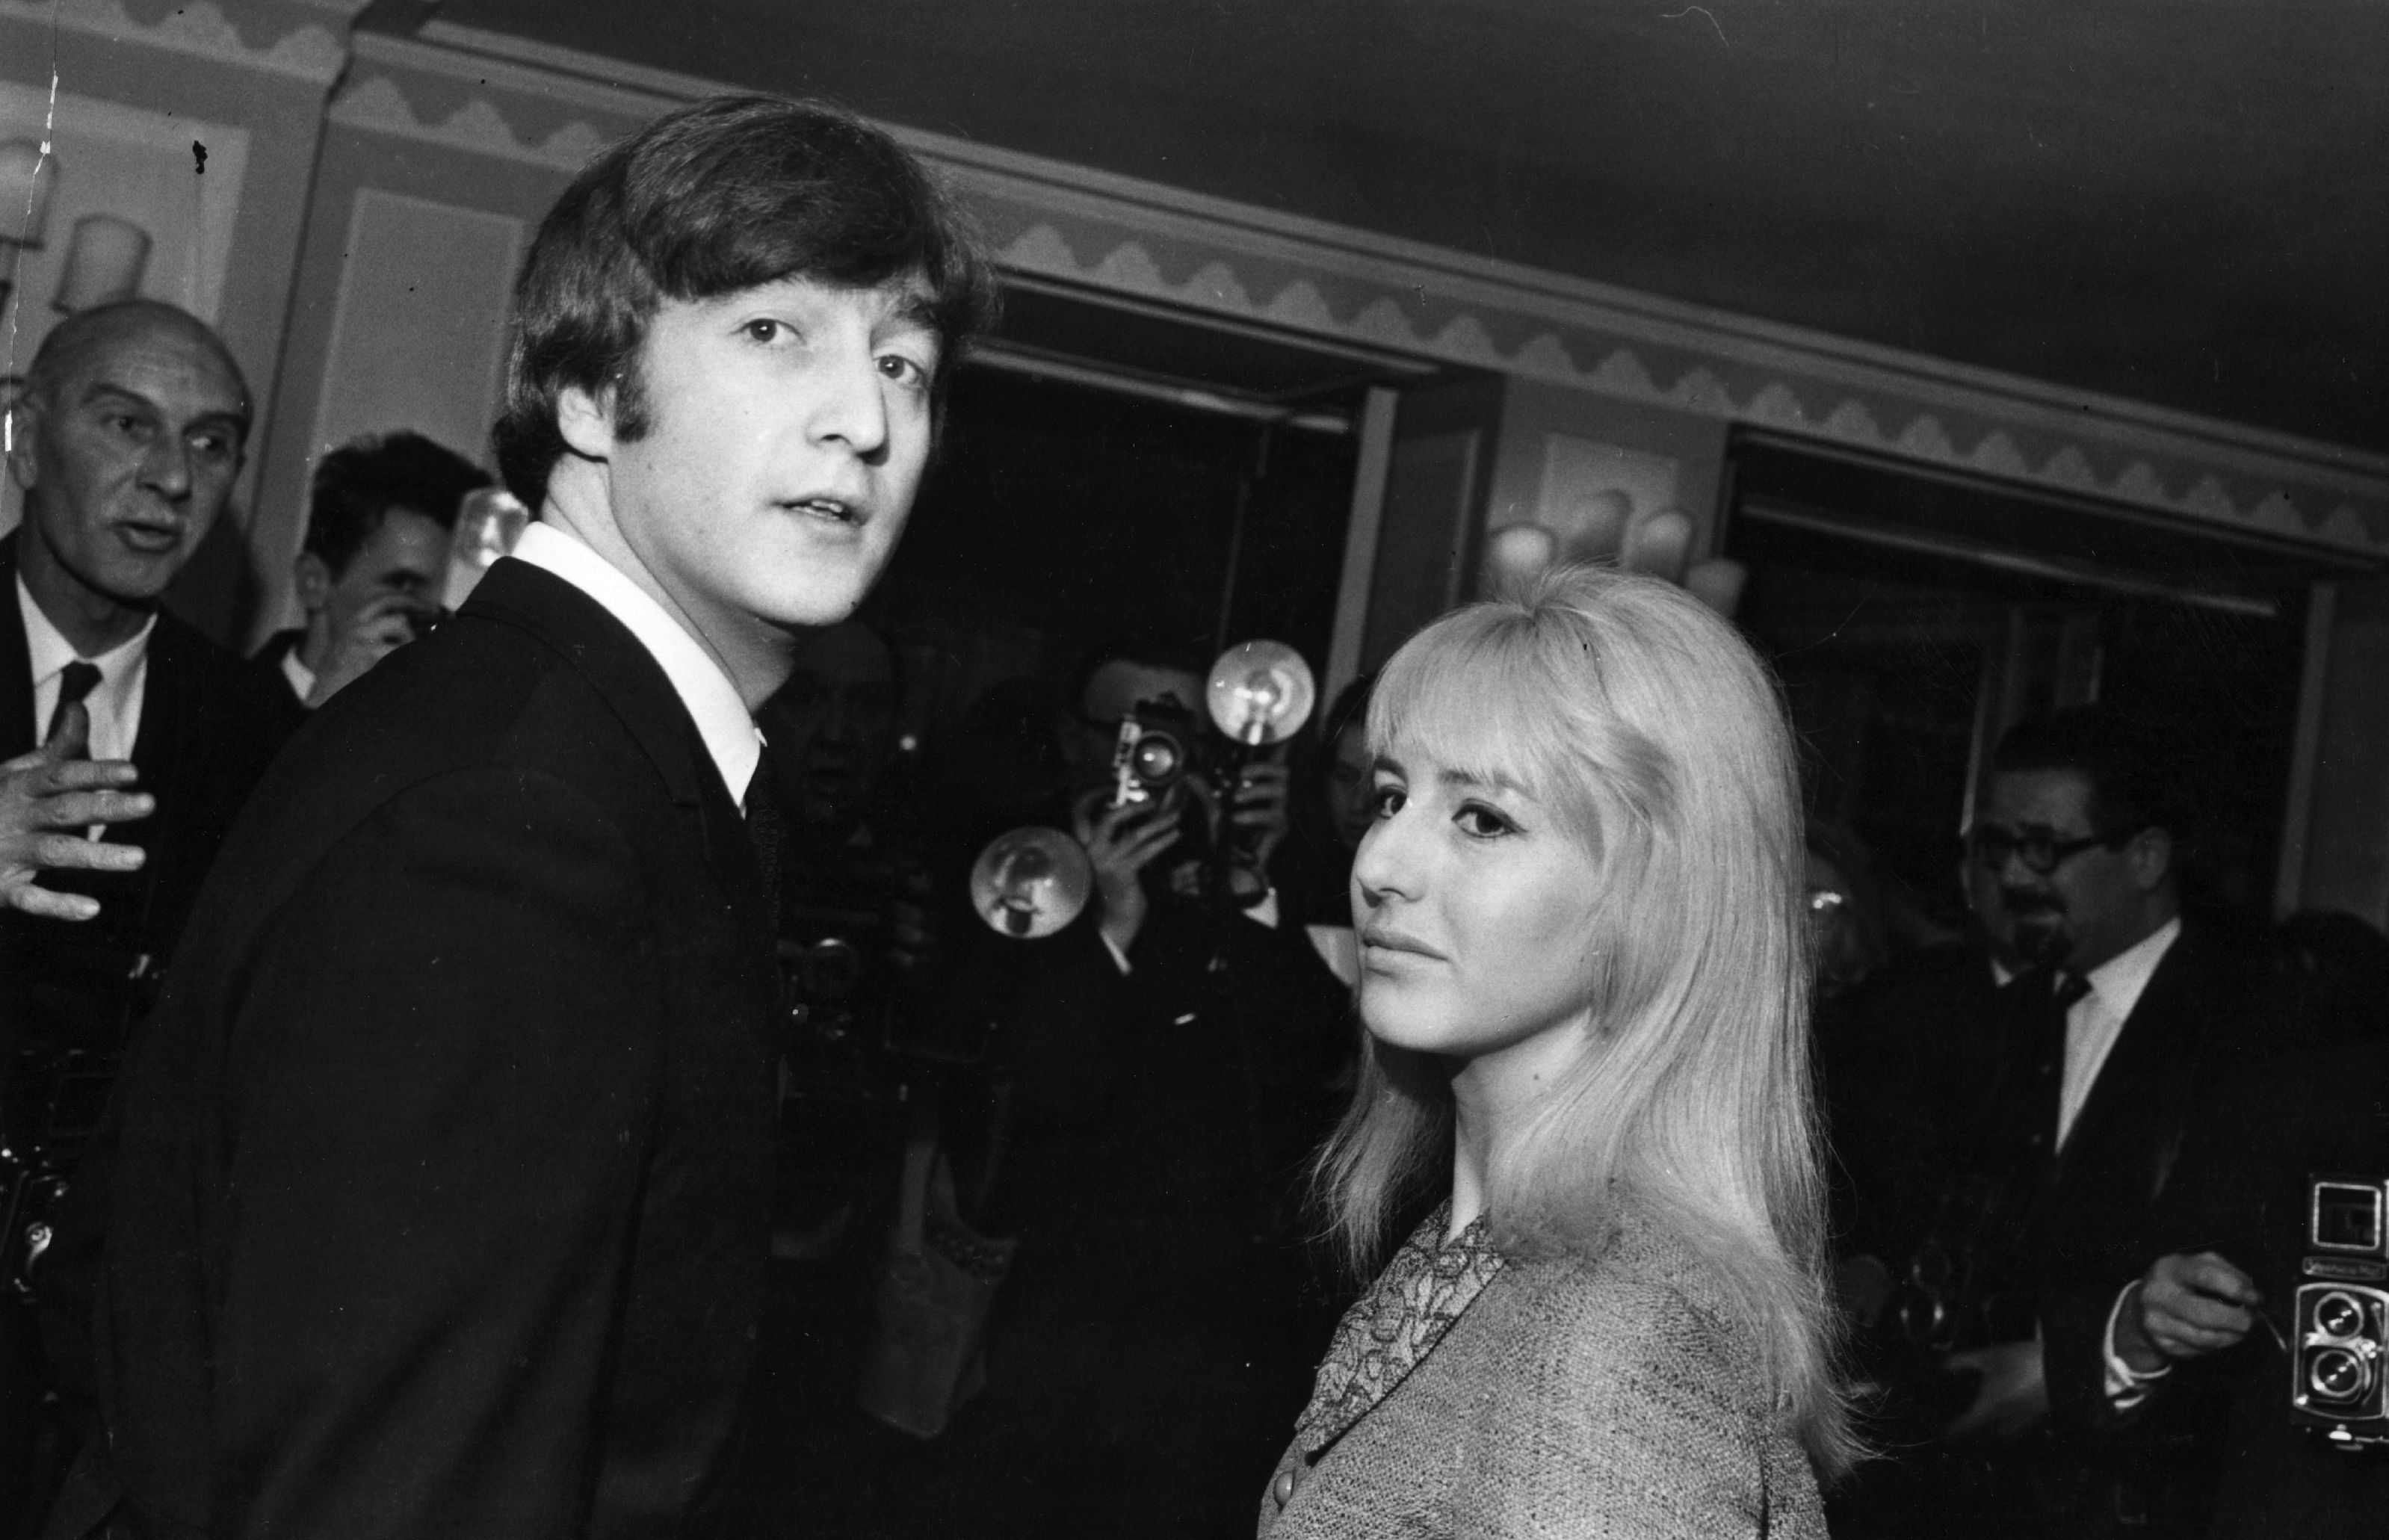 John Lennon of The Beatles and Cynthia Lennon at the Dorchester Hotel in London, England